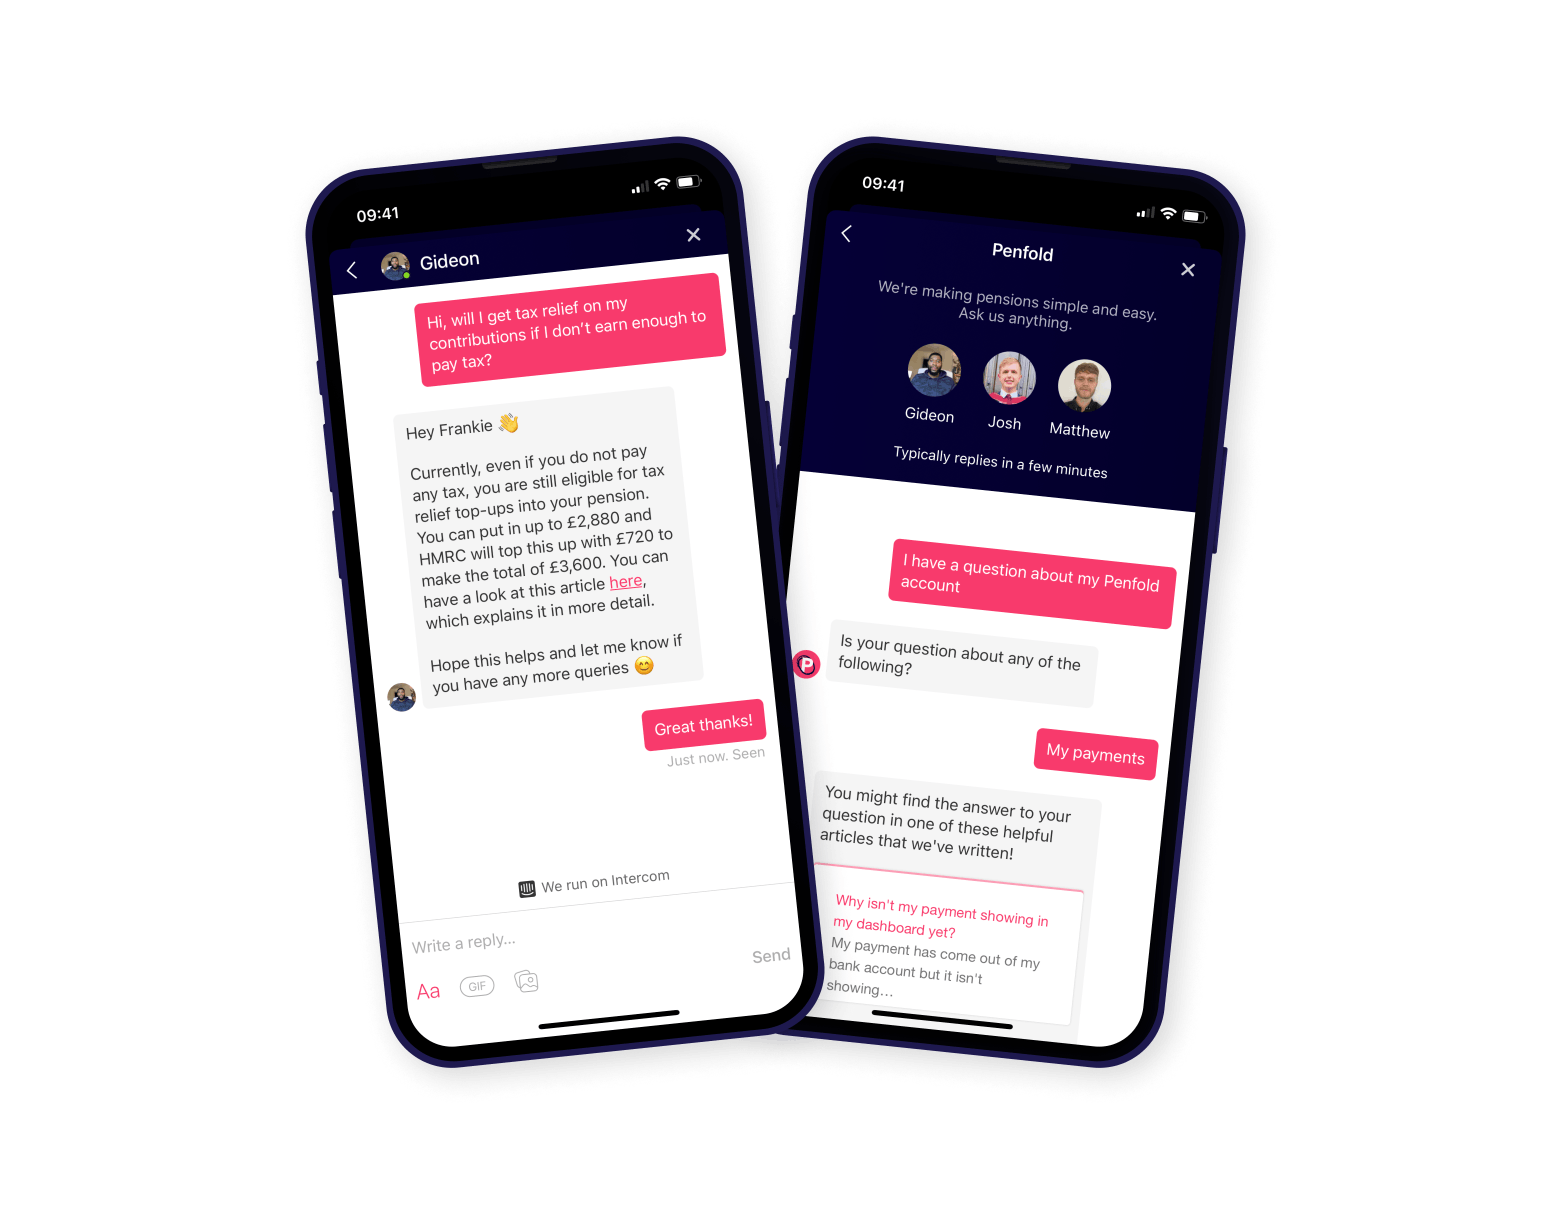 Penfold apps showing customer service chat and pension FAQs screens